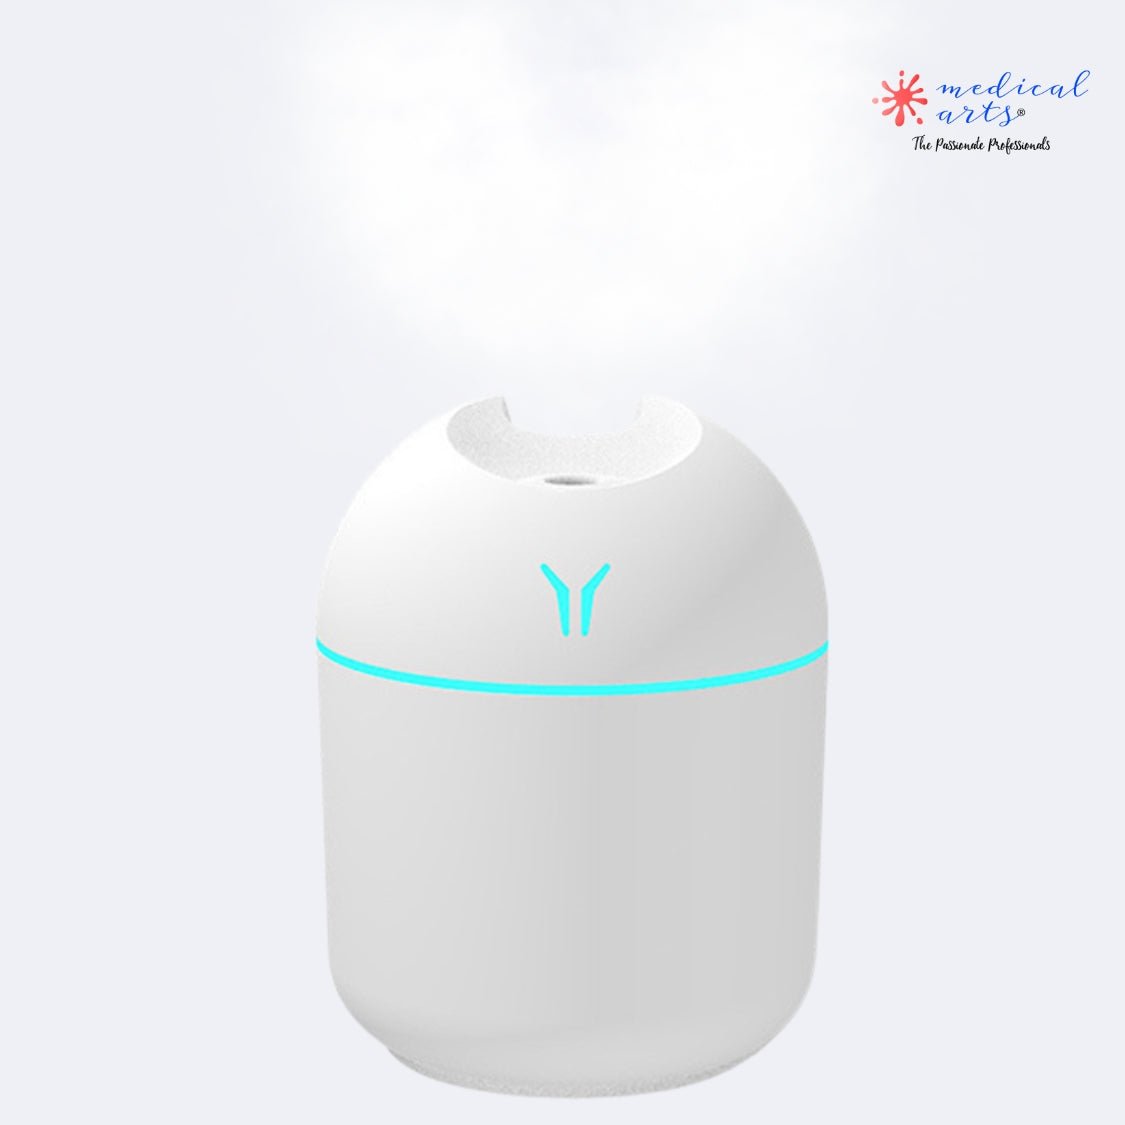 Ultrasonic Air Humidifier ⨋ Multifunctional Aromatherapy health and personal care Medical Arts Shop